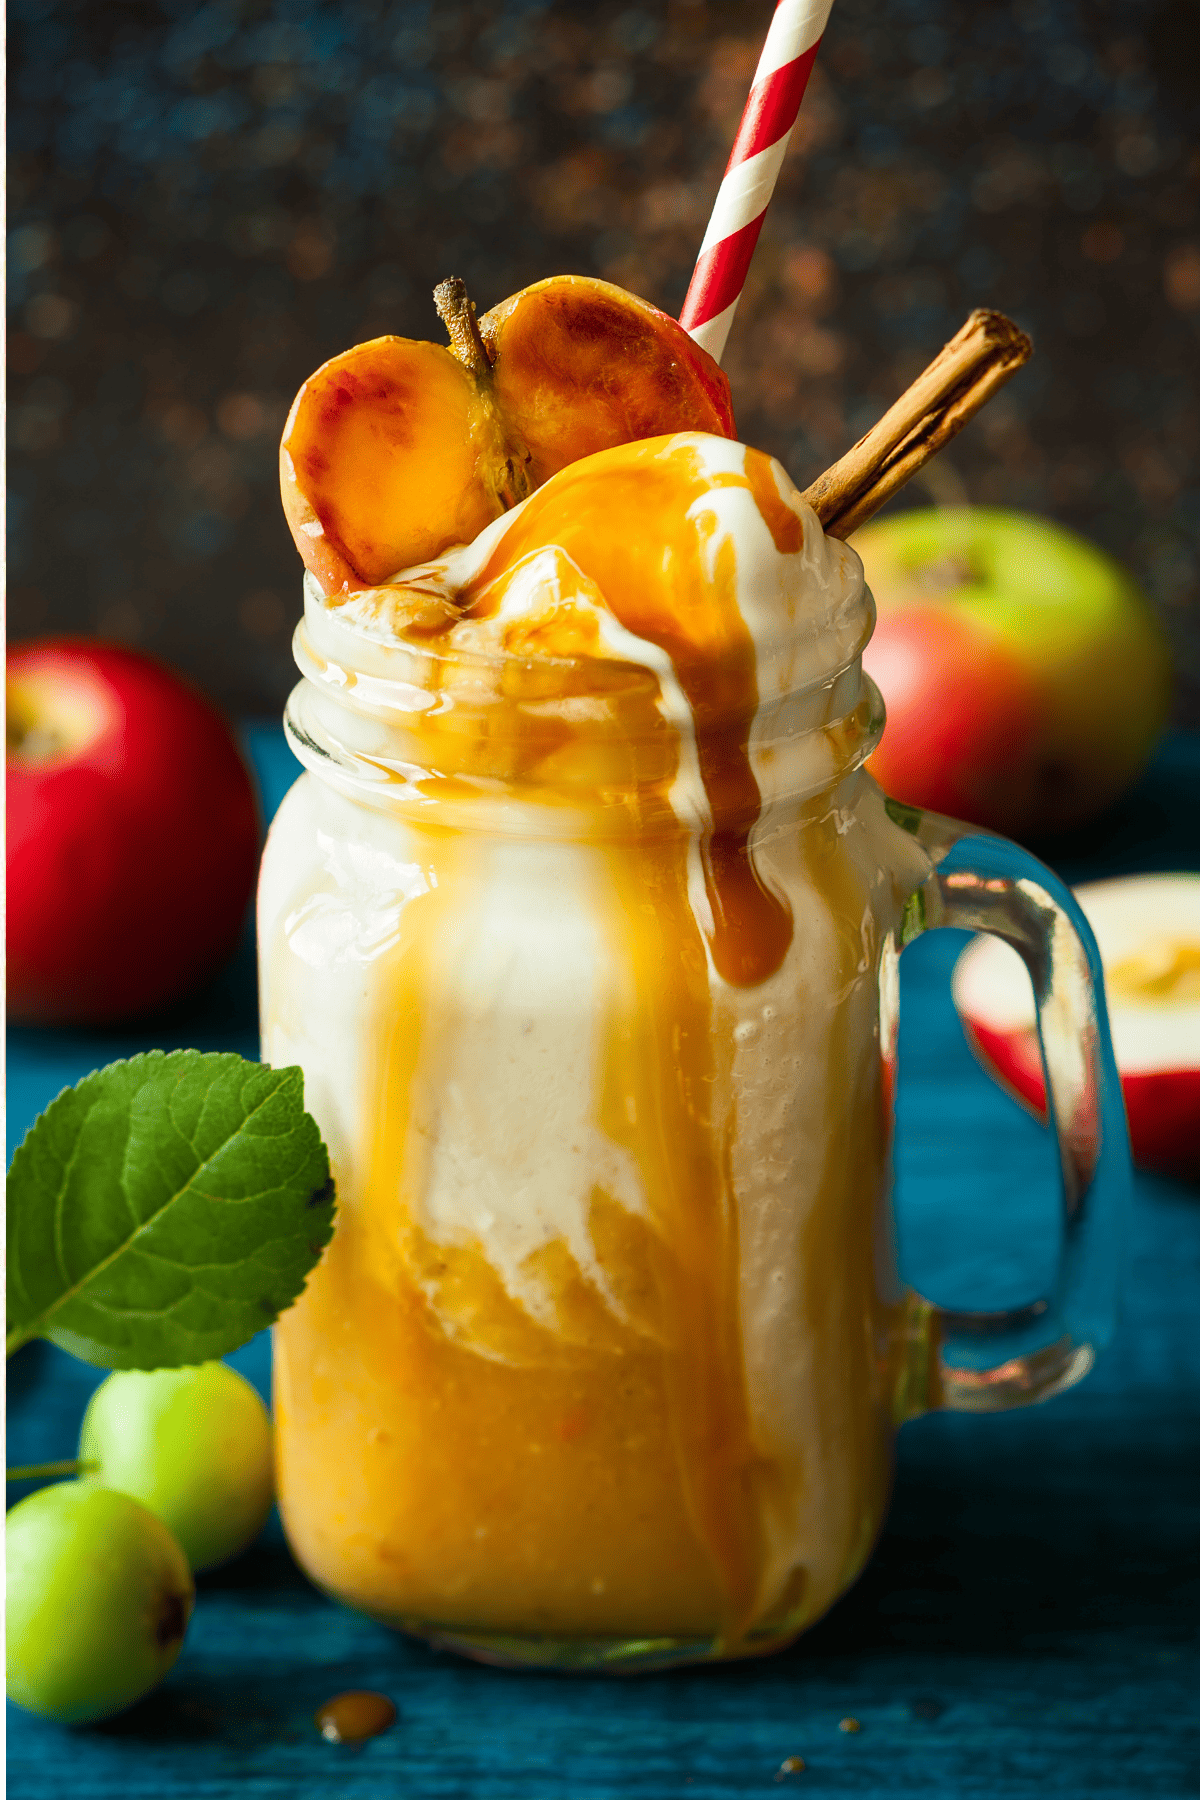 a glass of caramel apple cider topped with whipped cream and a dripping caramel sauce plus an apple, surrounded by apples and other garnishes.